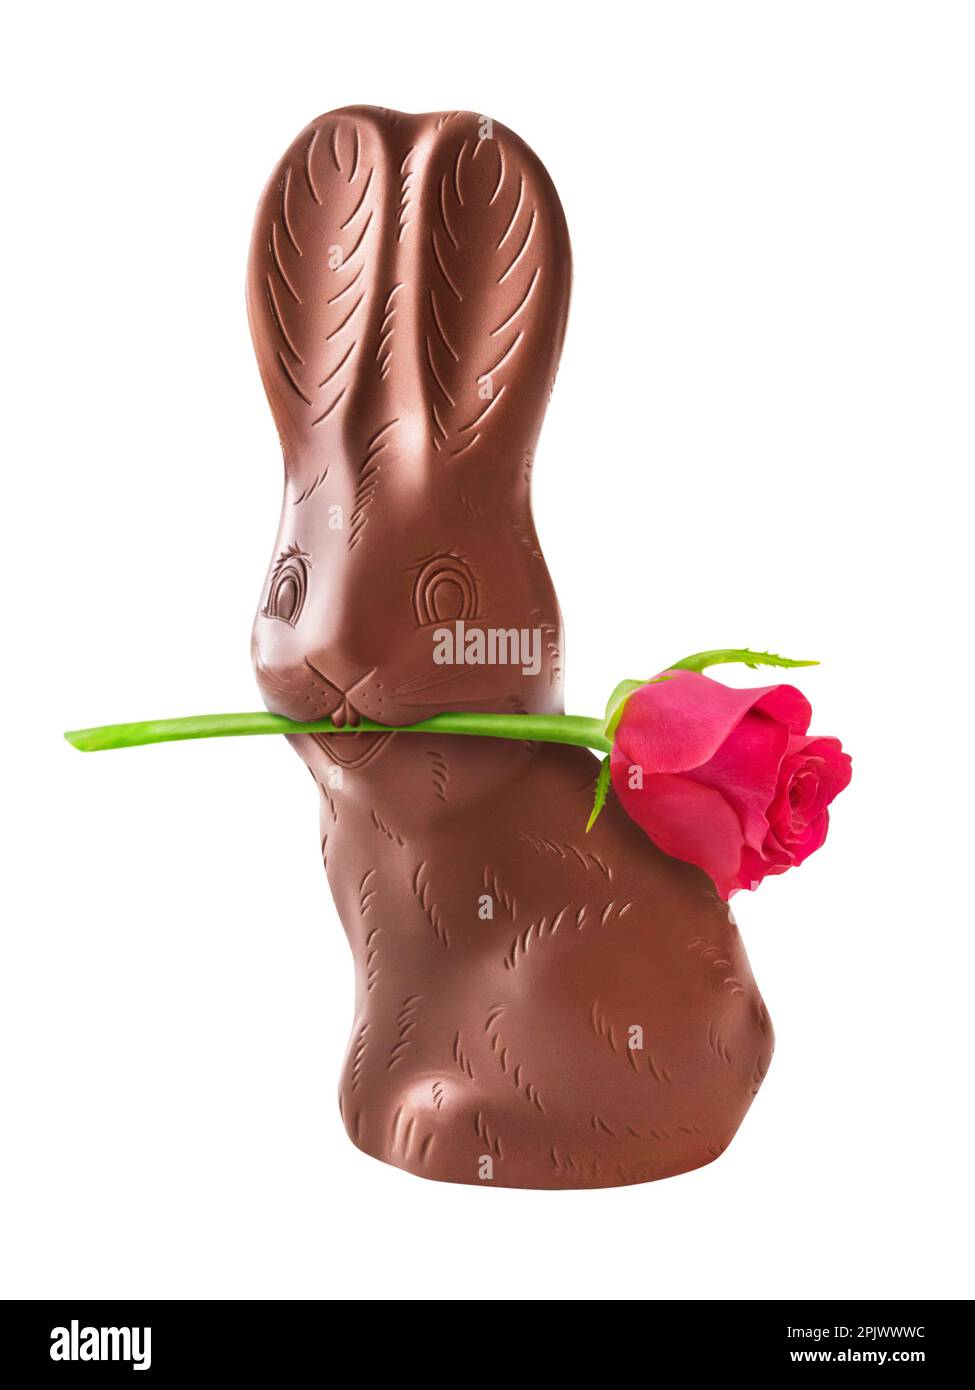 Chocolate Easter Bunny and red rose isolated on white background Stock Photo